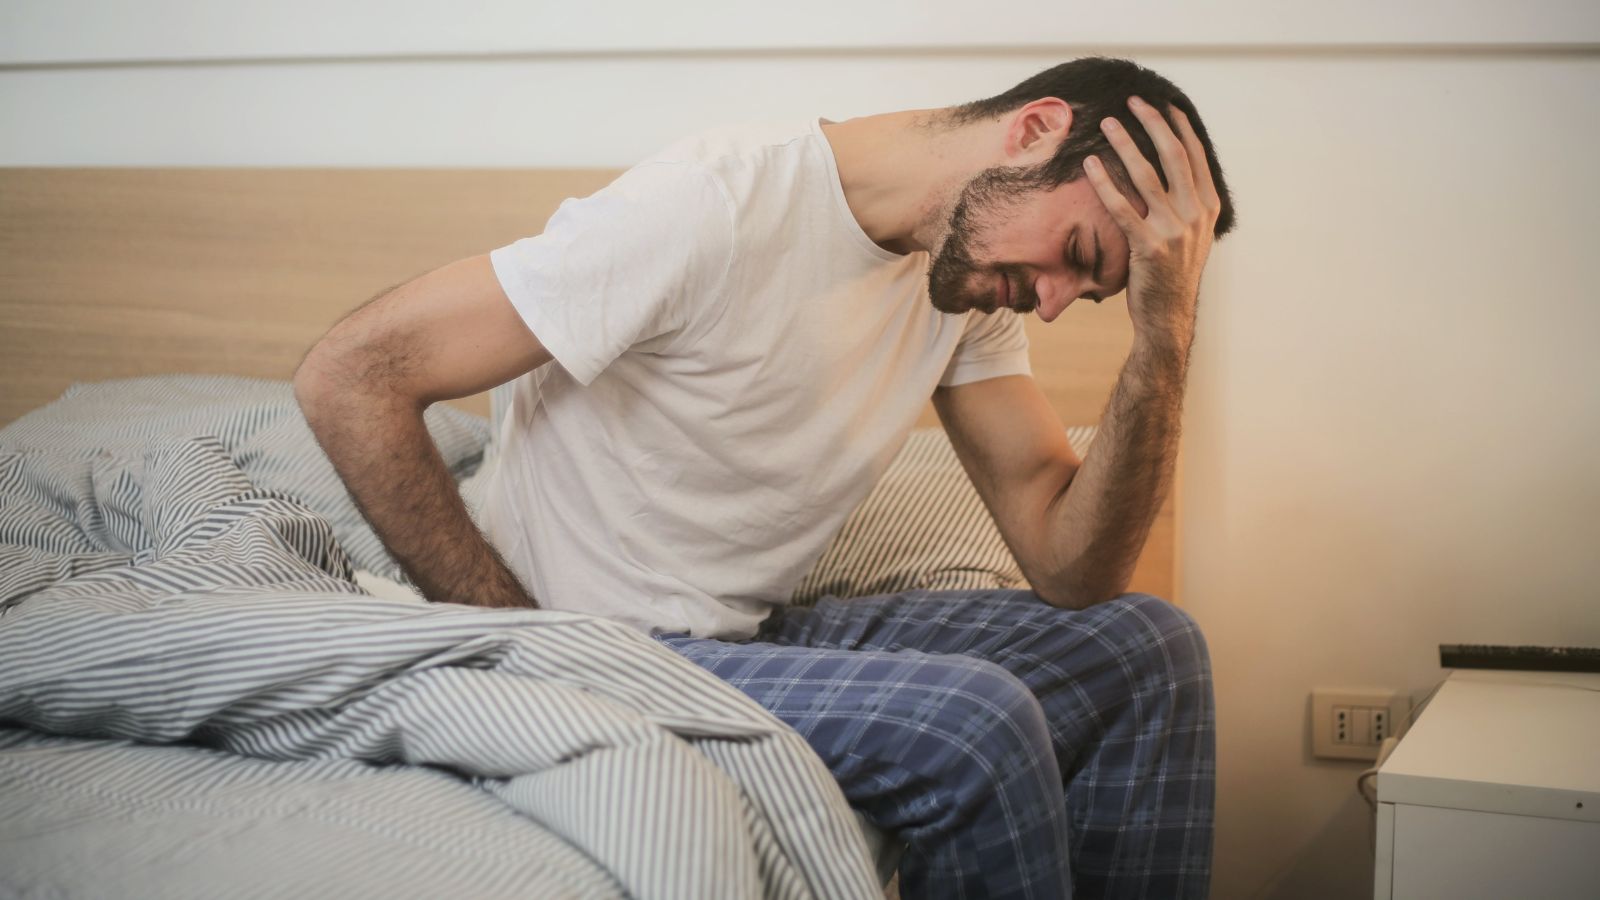 A person grabbing their head while getting up from bed